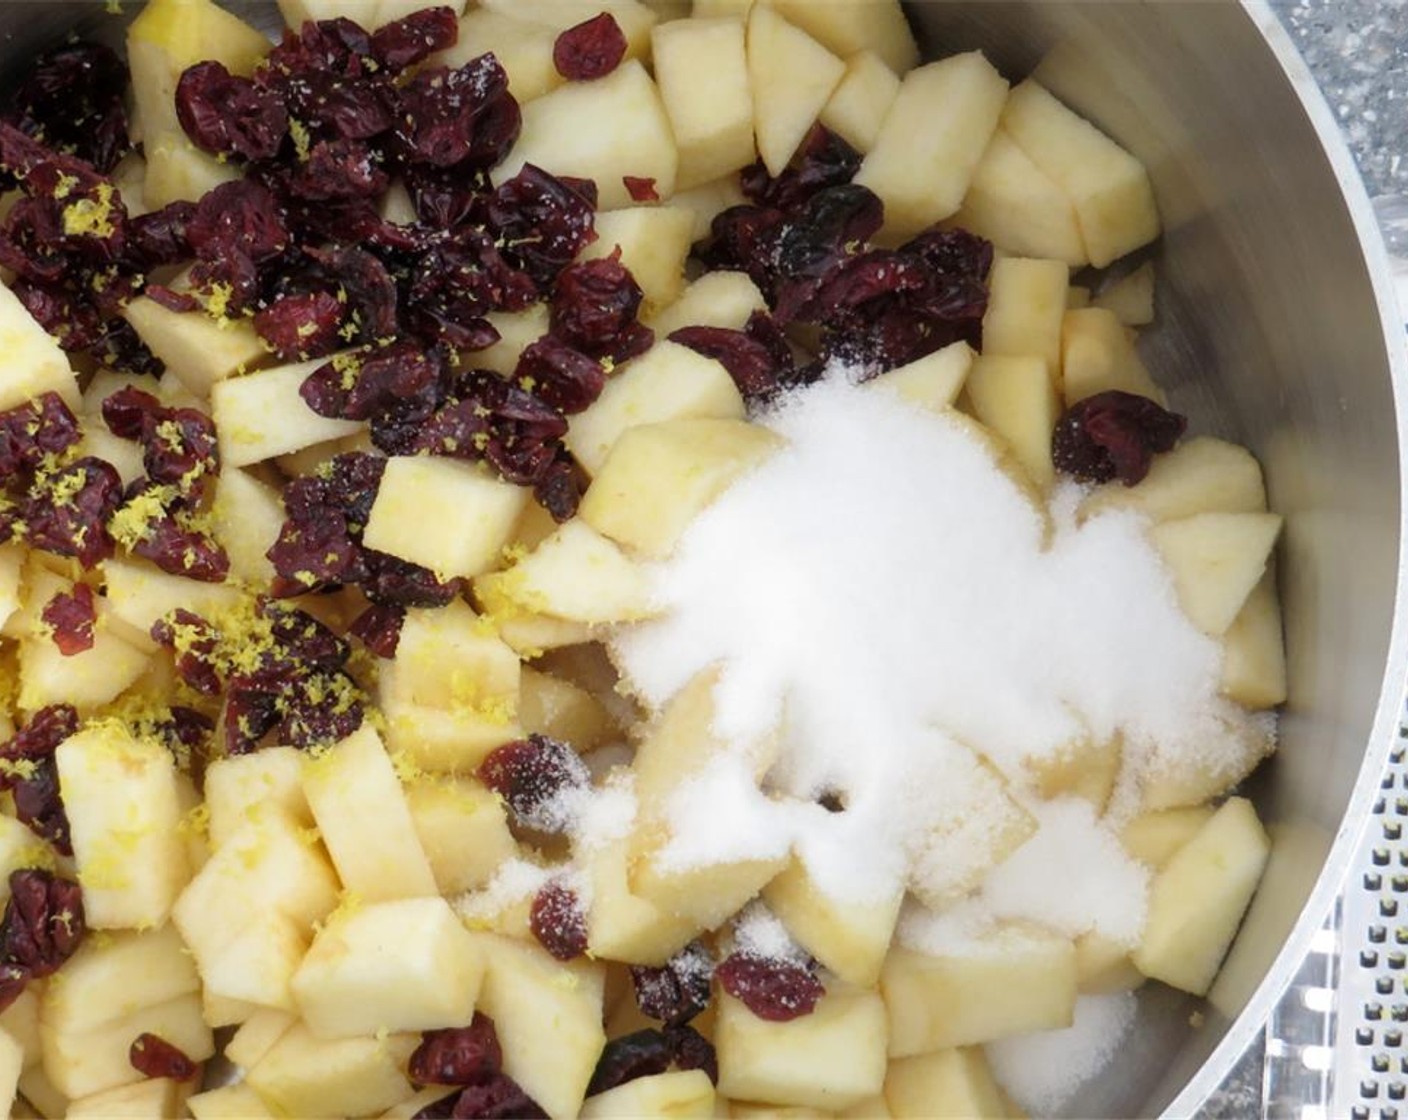 step 6 Heat a saucepan over medium heat. Add the diced apples, Dried Cranberries (1/2 cup), Granulated Sugar (1/4 cup), lemon juice and zest, and Water (1/2 cup). Cook until apples are softened and cranberries are plump 8-10 minutes.